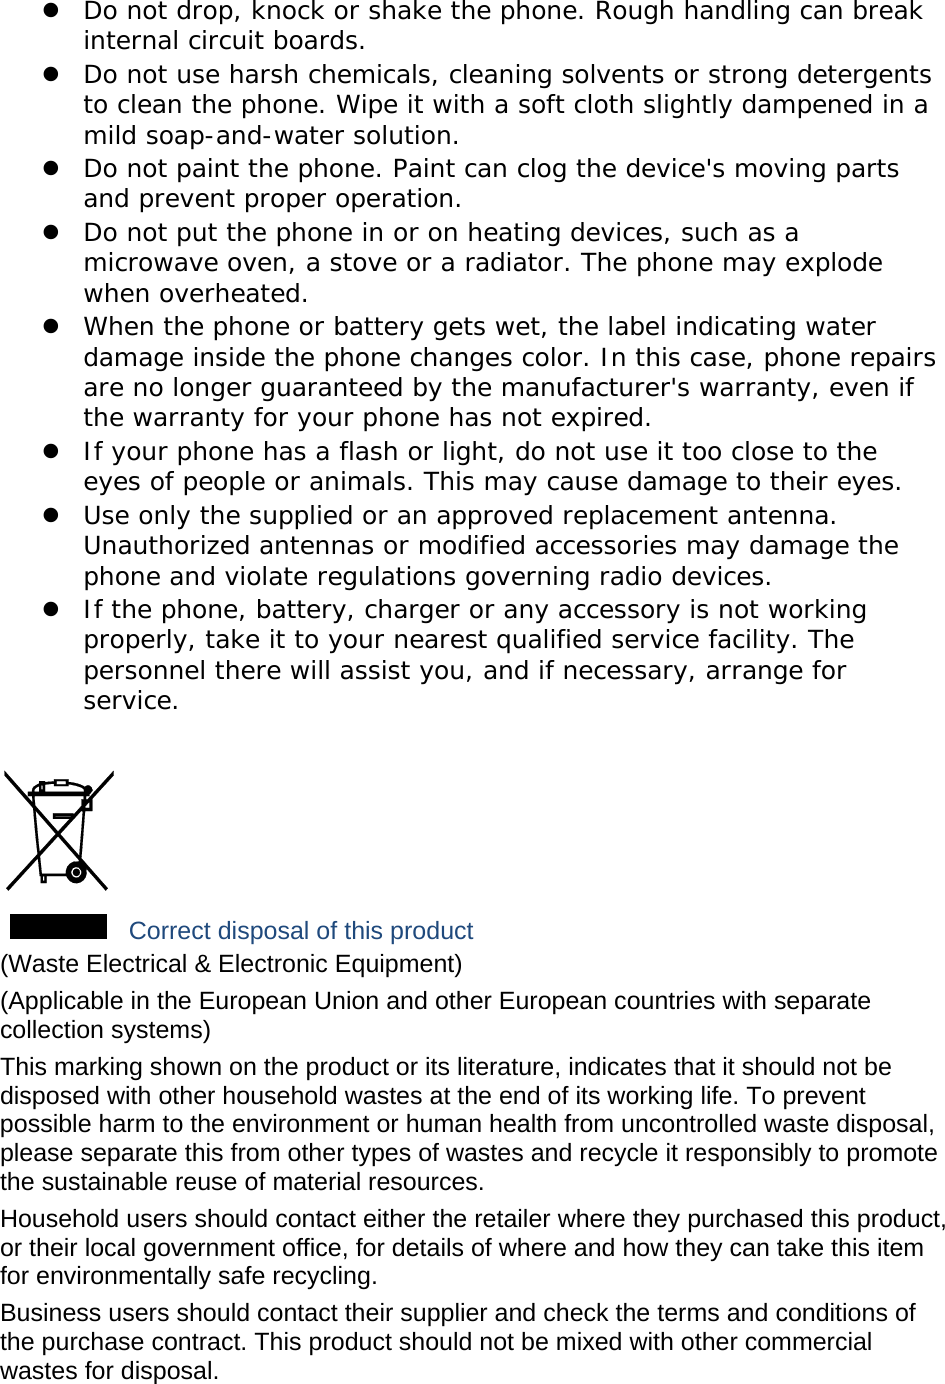  Do not drop, knock or shake the phone. Rough handling can break internal circuit boards.  Do not use harsh chemicals, cleaning solvents or strong detergents to clean the phone. Wipe it with a soft cloth slightly dampened in a mild soap-and-water solution.  Do not paint the phone. Paint can clog the device&apos;s moving parts and prevent proper operation.  Do not put the phone in or on heating devices, such as a microwave oven, a stove or a radiator. The phone may explode when overheated.  When the phone or battery gets wet, the label indicating water damage inside the phone changes color. In this case, phone repairs are no longer guaranteed by the manufacturer&apos;s warranty, even if the warranty for your phone has not expired.   If your phone has a flash or light, do not use it too close to the eyes of people or animals. This may cause damage to their eyes.  Use only the supplied or an approved replacement antenna. Unauthorized antennas or modified accessories may damage the phone and violate regulations governing radio devices.  If the phone, battery, charger or any accessory is not working properly, take it to your nearest qualified service facility. The personnel there will assist you, and if necessary, arrange for service.   Correct disposal of this product (Waste Electrical &amp; Electronic Equipment) (Applicable in the European Union and other European countries with separate collection systems) This marking shown on the product or its literature, indicates that it should not be disposed with other household wastes at the end of its working life. To prevent possible harm to the environment or human health from uncontrolled waste disposal, please separate this from other types of wastes and recycle it responsibly to promote the sustainable reuse of material resources. Household users should contact either the retailer where they purchased this product, or their local government office, for details of where and how they can take this item for environmentally safe recycling. Business users should contact their supplier and check the terms and conditions of the purchase contract. This product should not be mixed with other commercial wastes for disposal. 